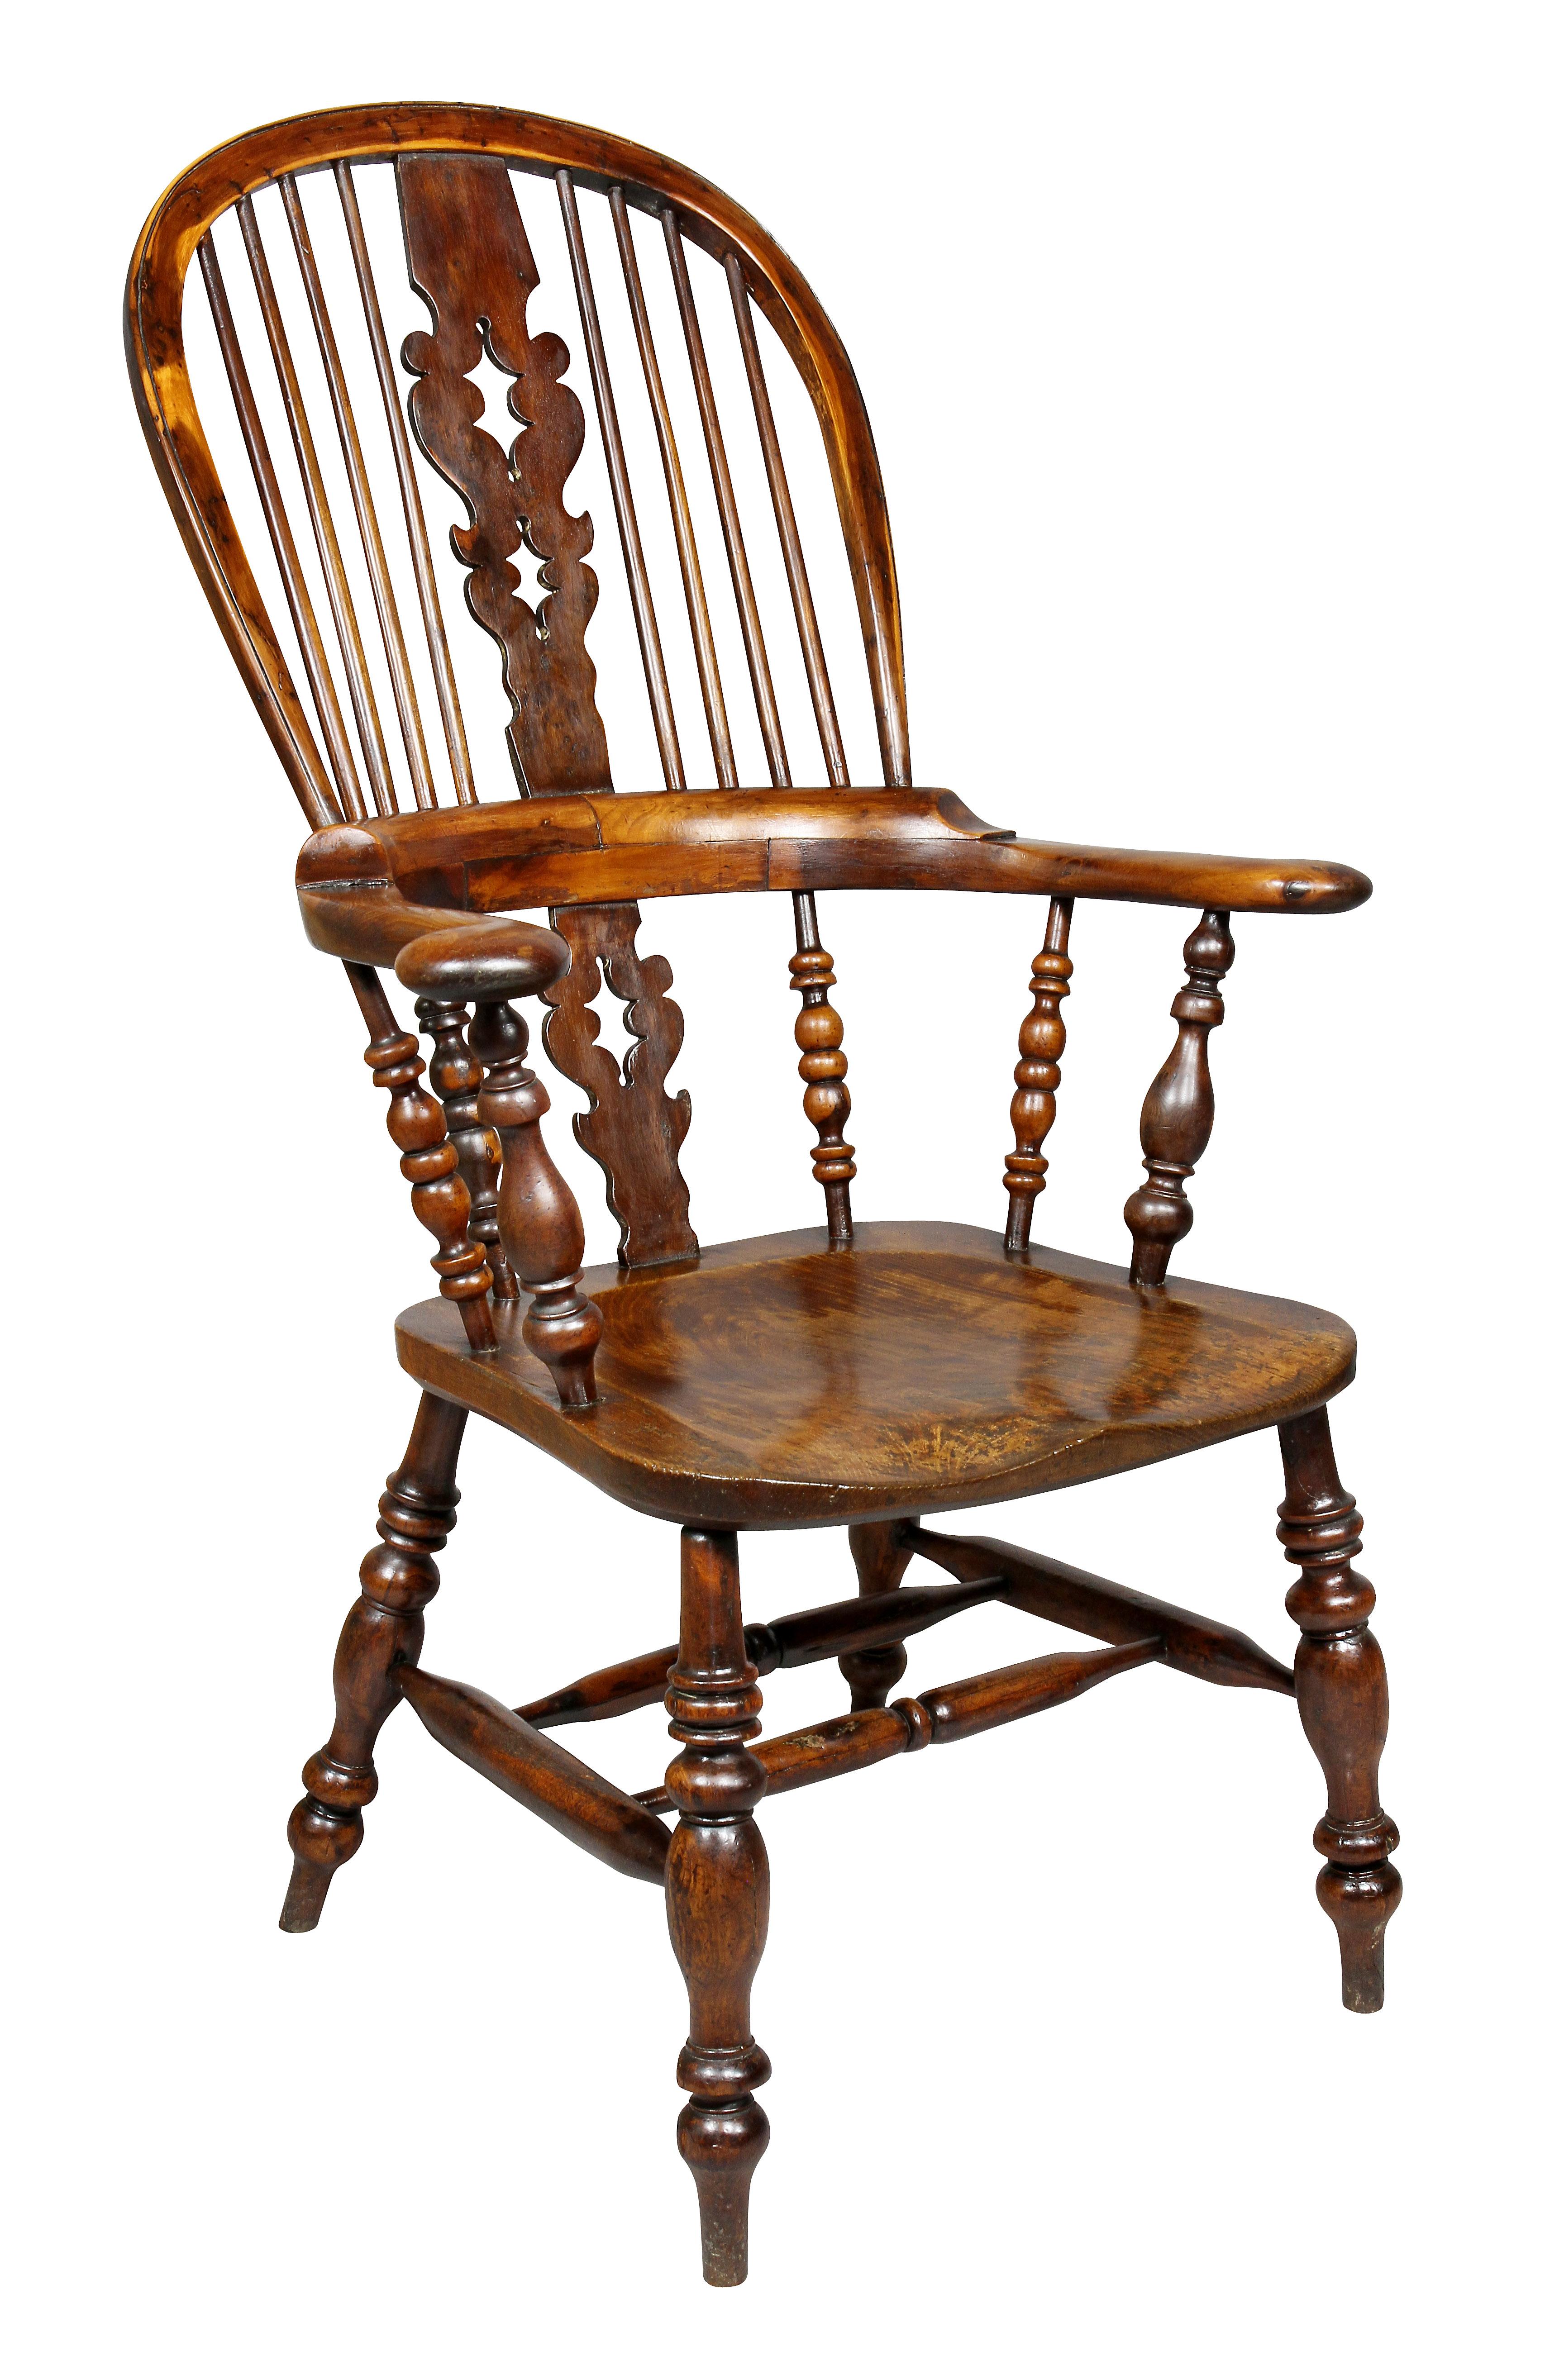 Each with an arched back and central splat with tree form cutout, arms with curved out arms, saddle seat raised on turned legs and H form stretchers. Provenance; Estate of John Volk noted Palm Beach architect.